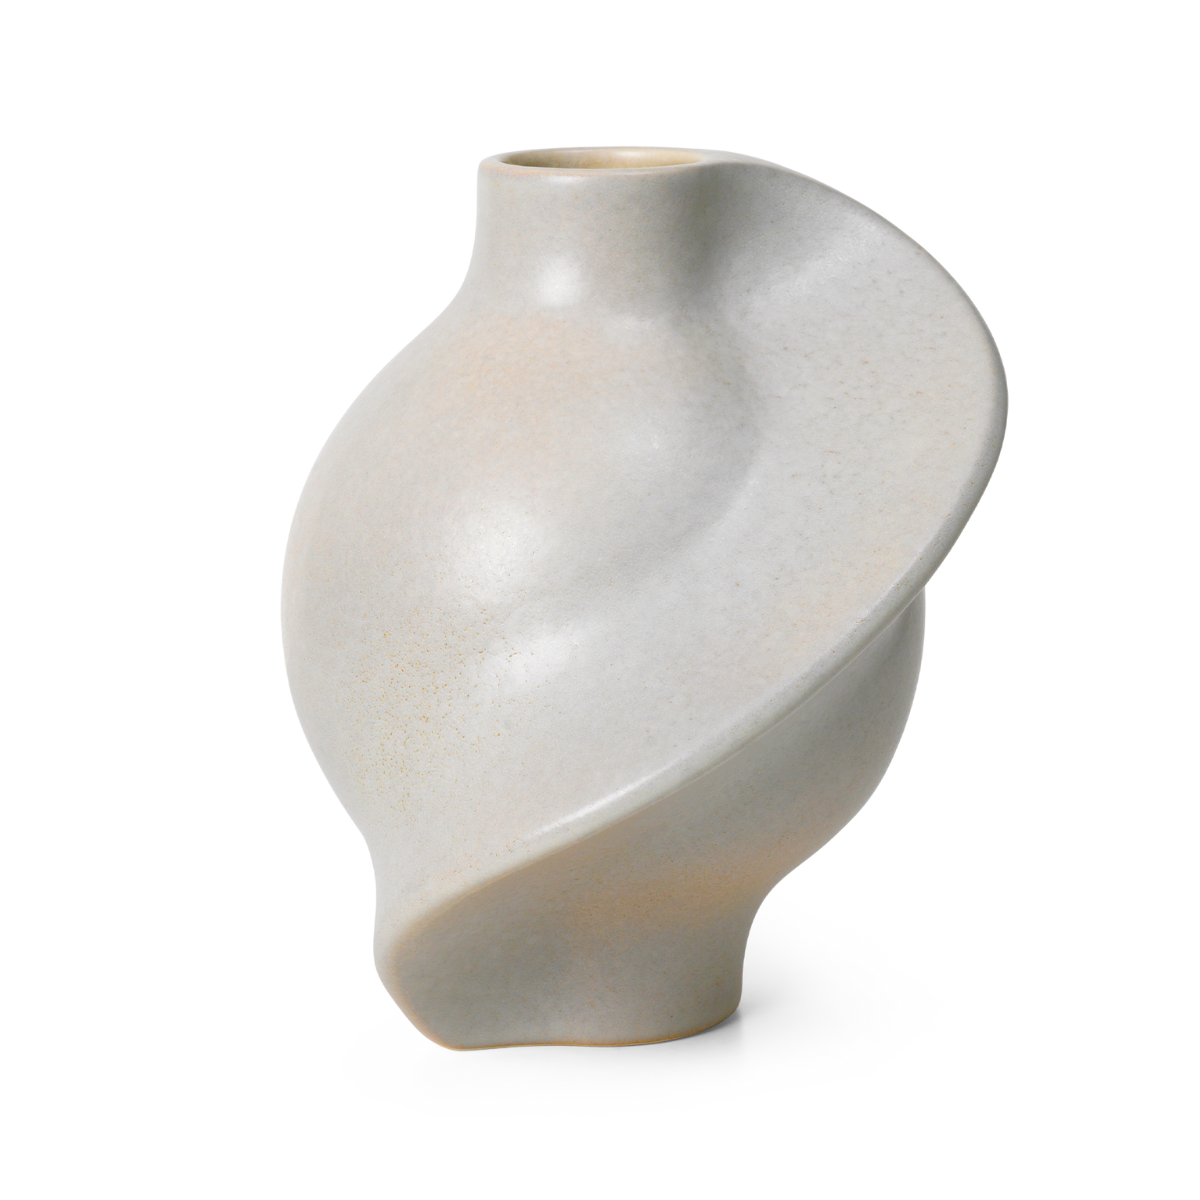 LOUISE ROE | Pirout Vase 02